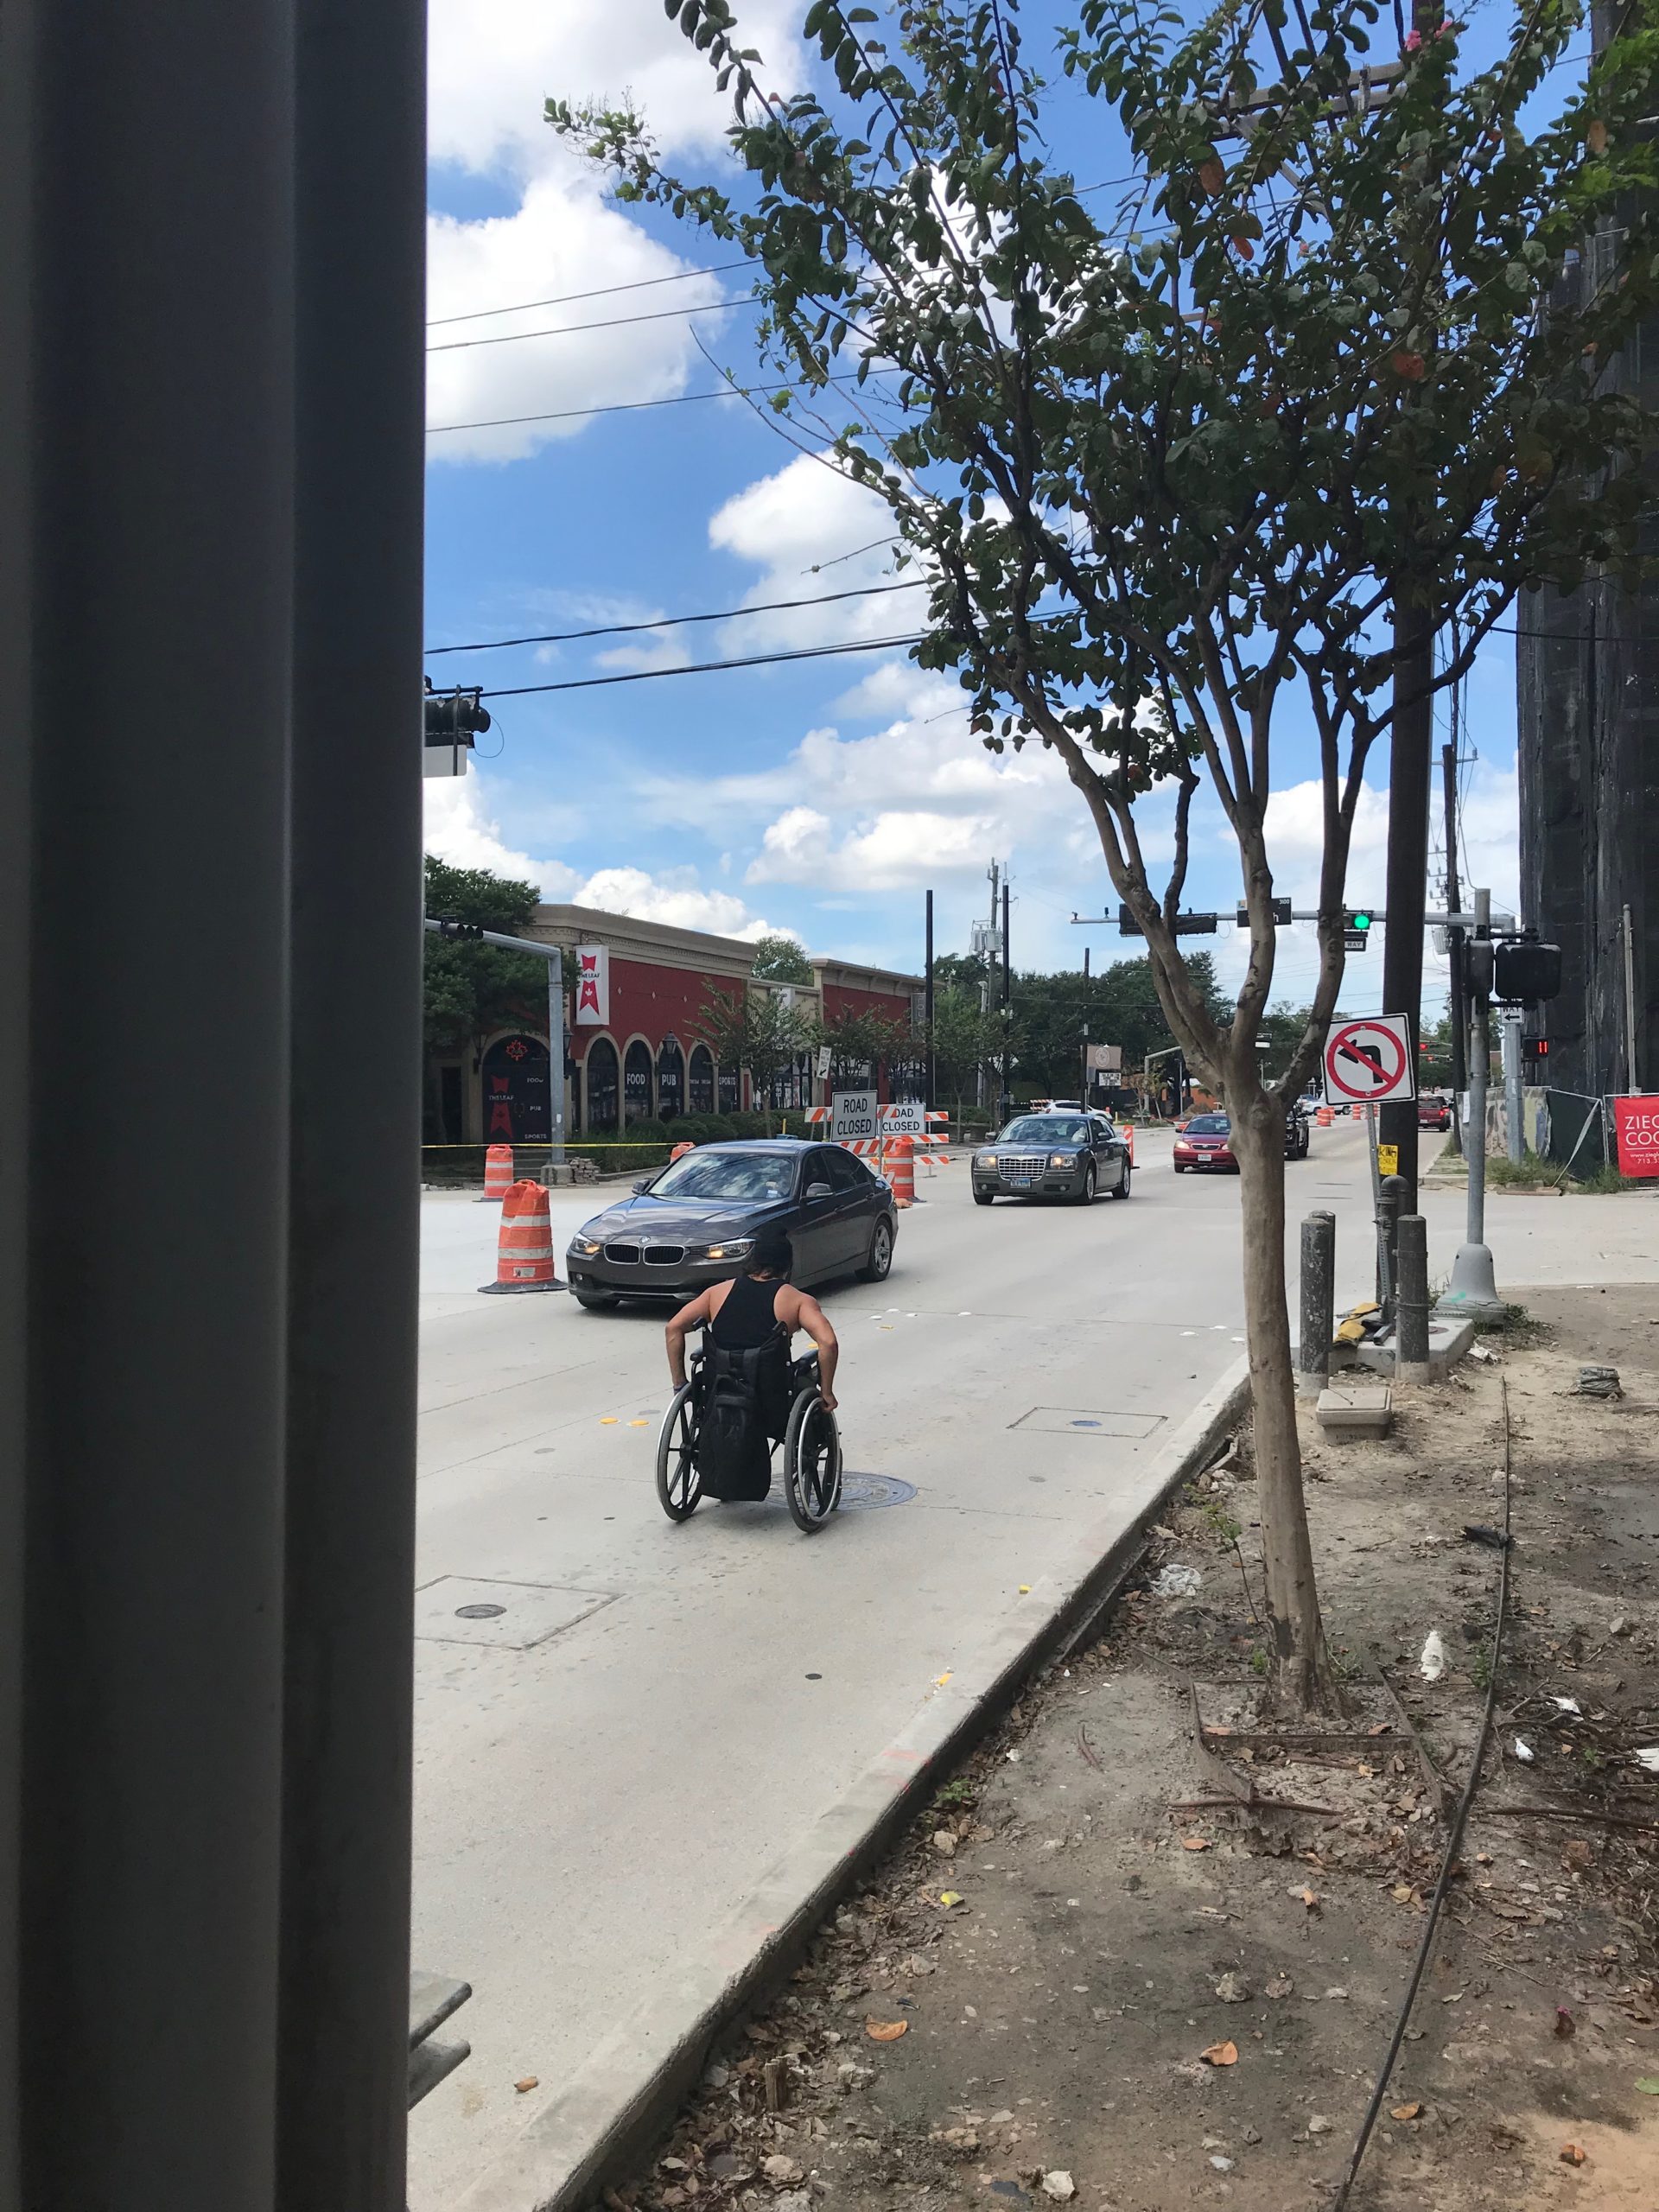 A man in a wheelchair rolling on the street because there is no sidewalk.